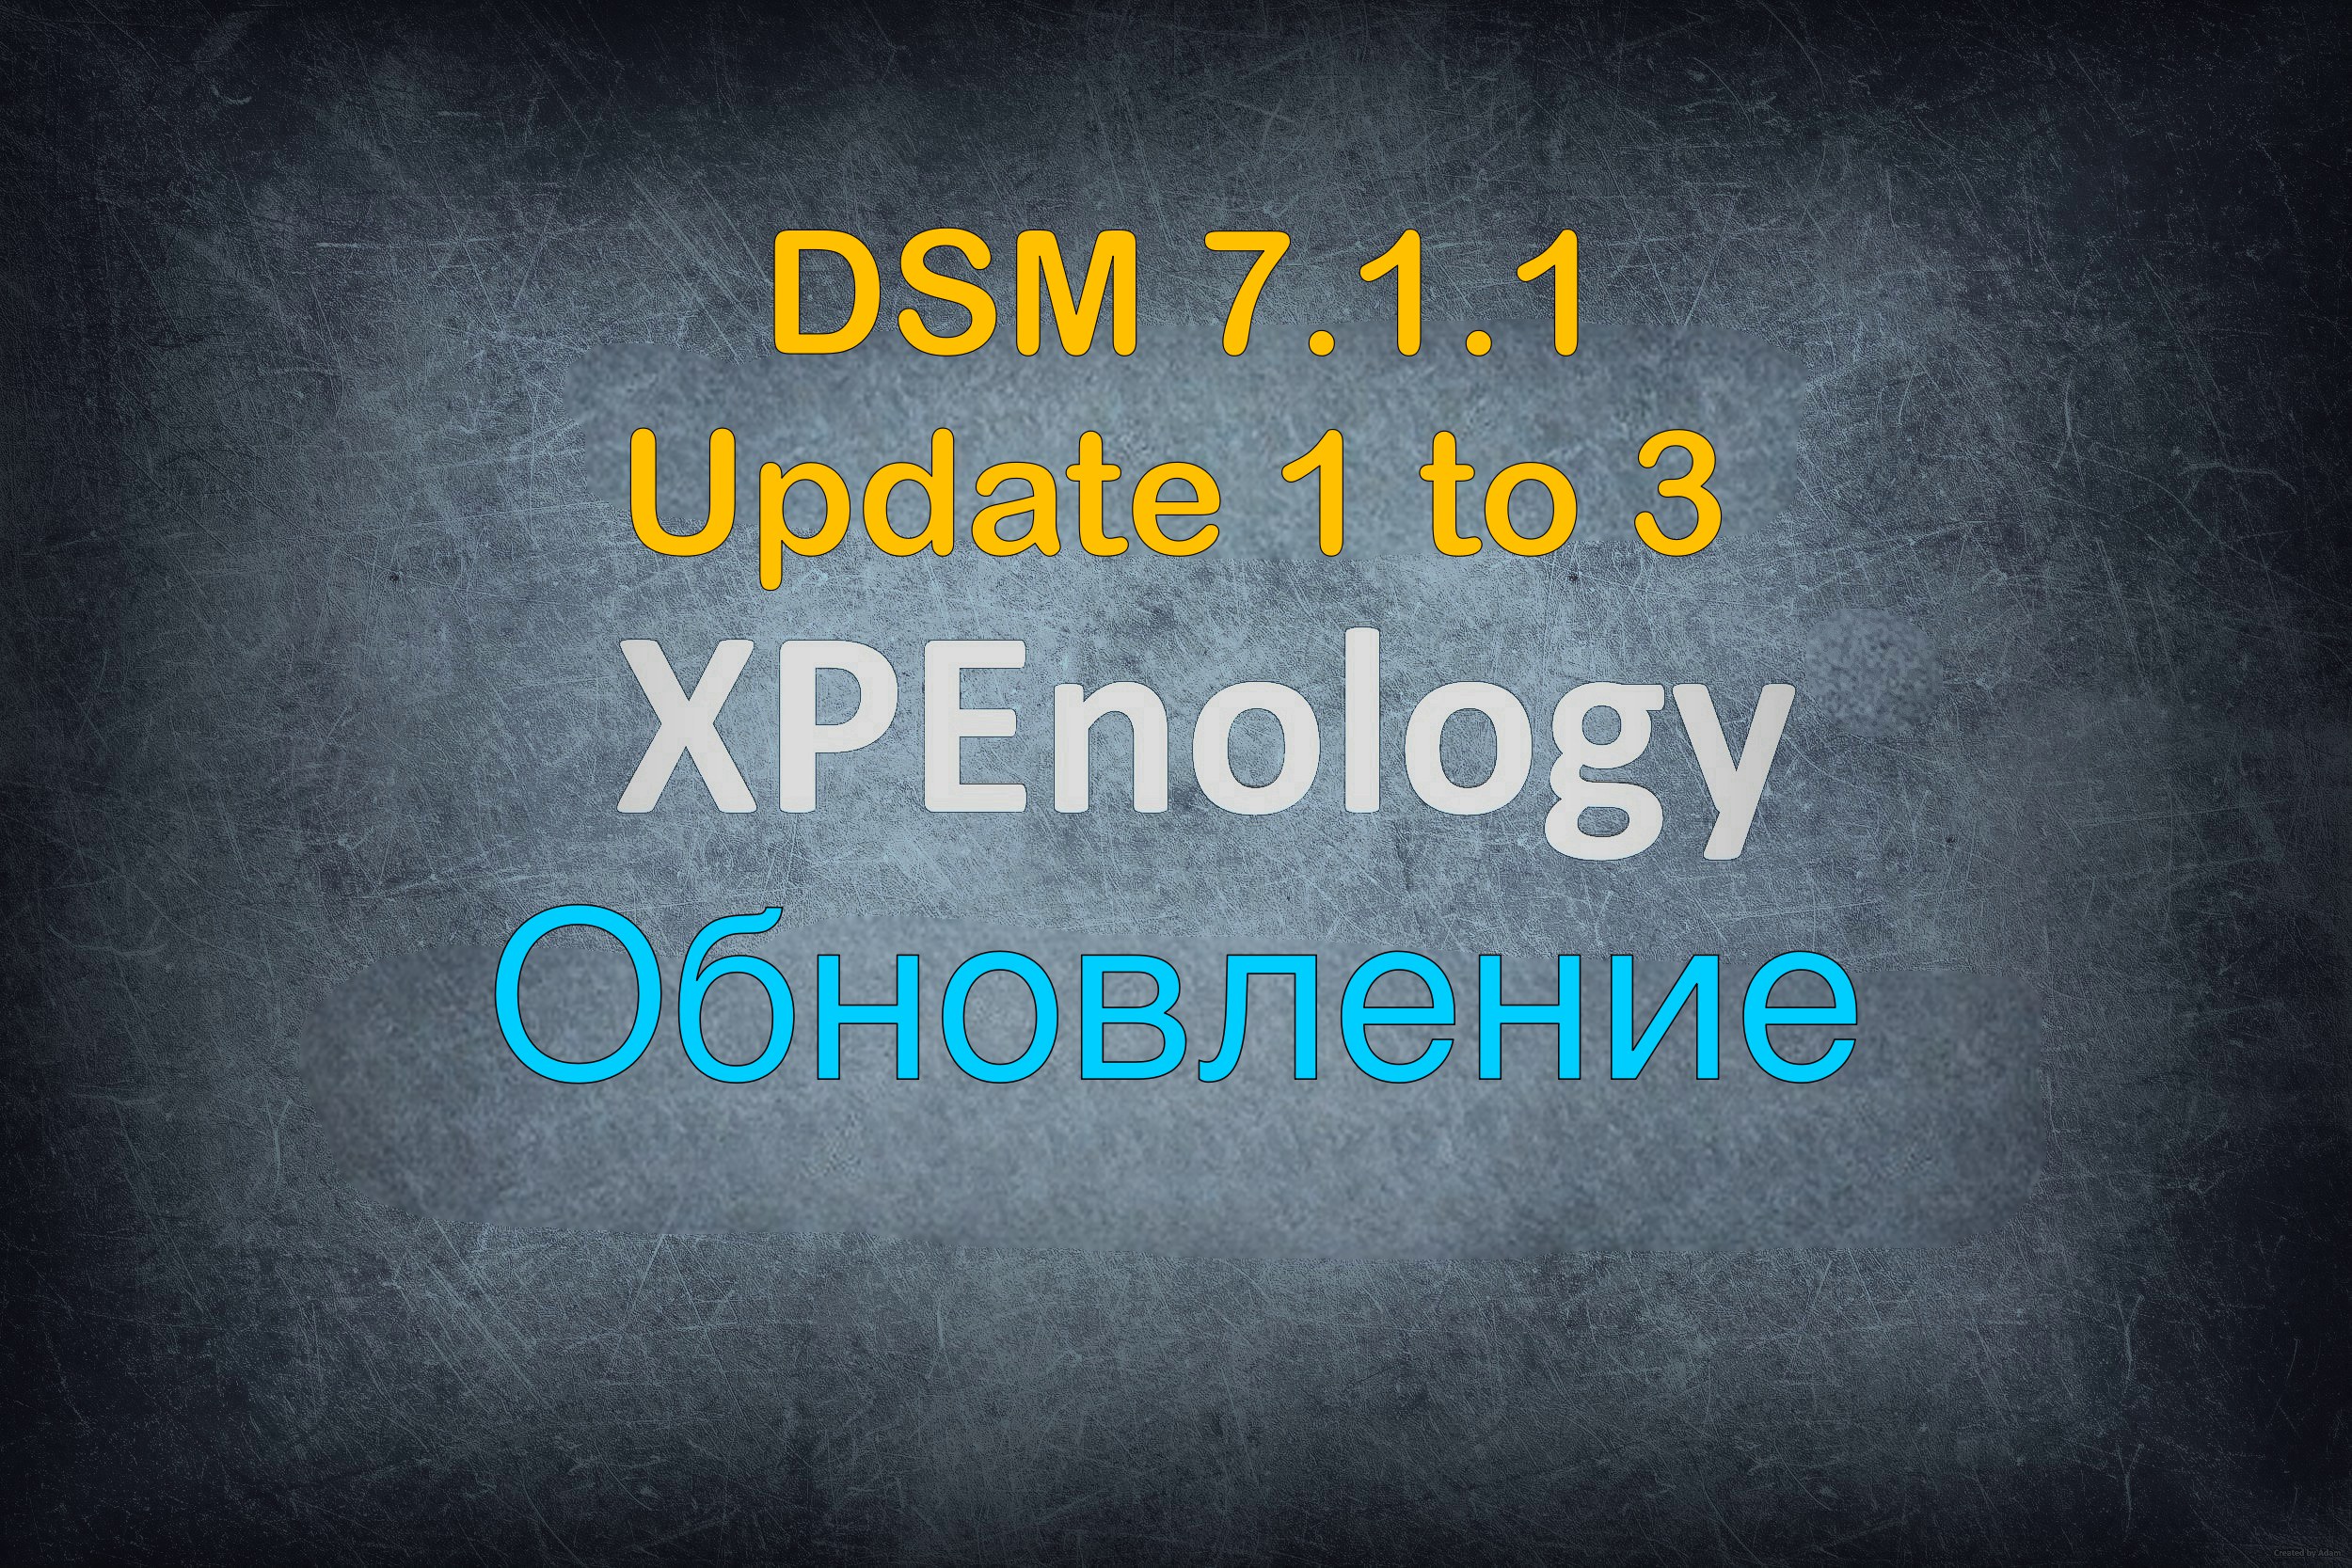 Read more about the article XPEnology обновление DSM 7.1.1 Update 1 до Update 3